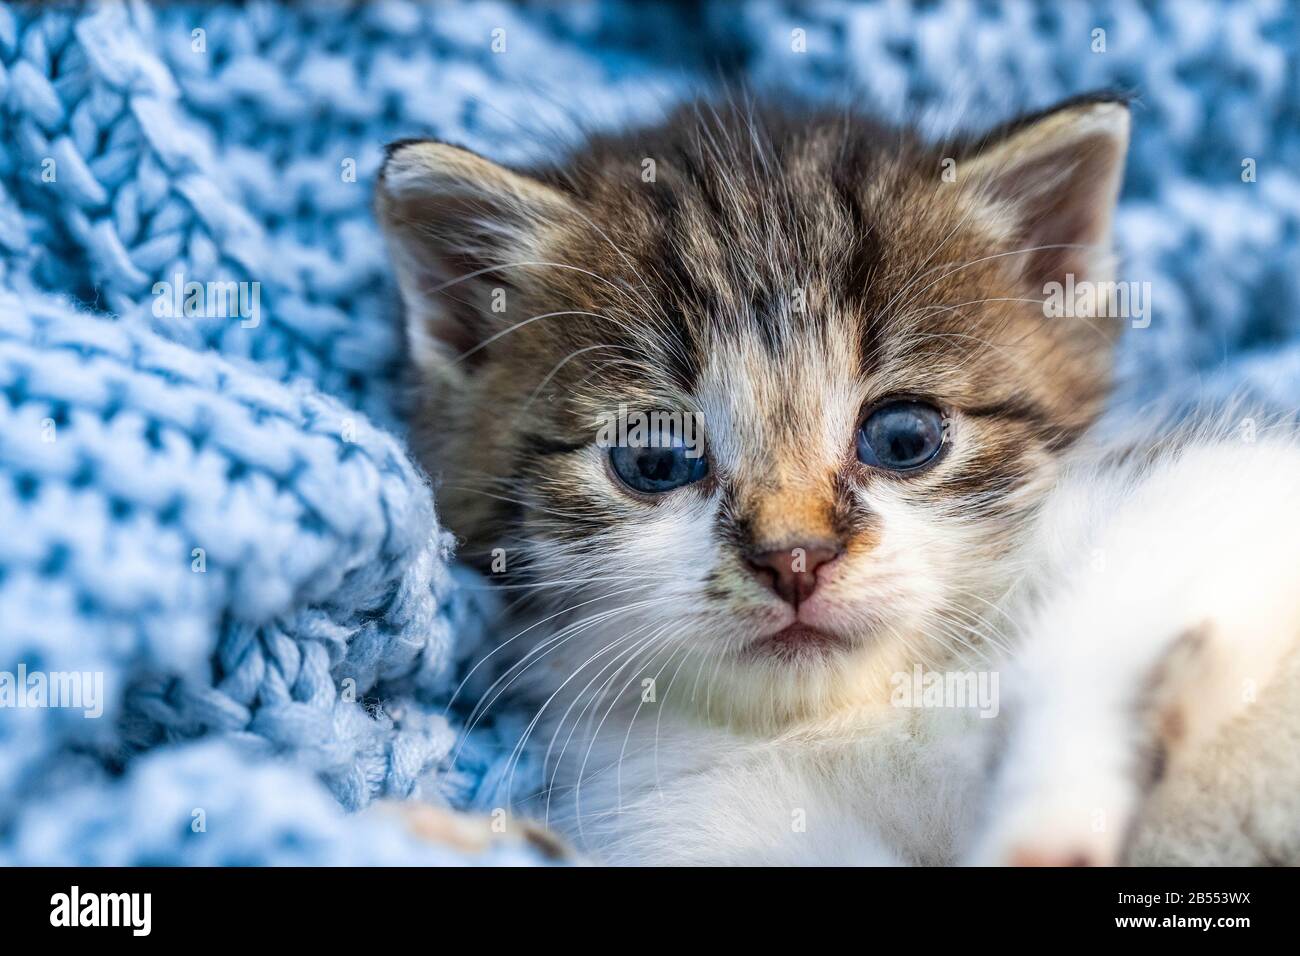 Cute tabby kitten relaxing on blue blanket, with blue eyes wide open looking at the camera. Close up Stock Photo